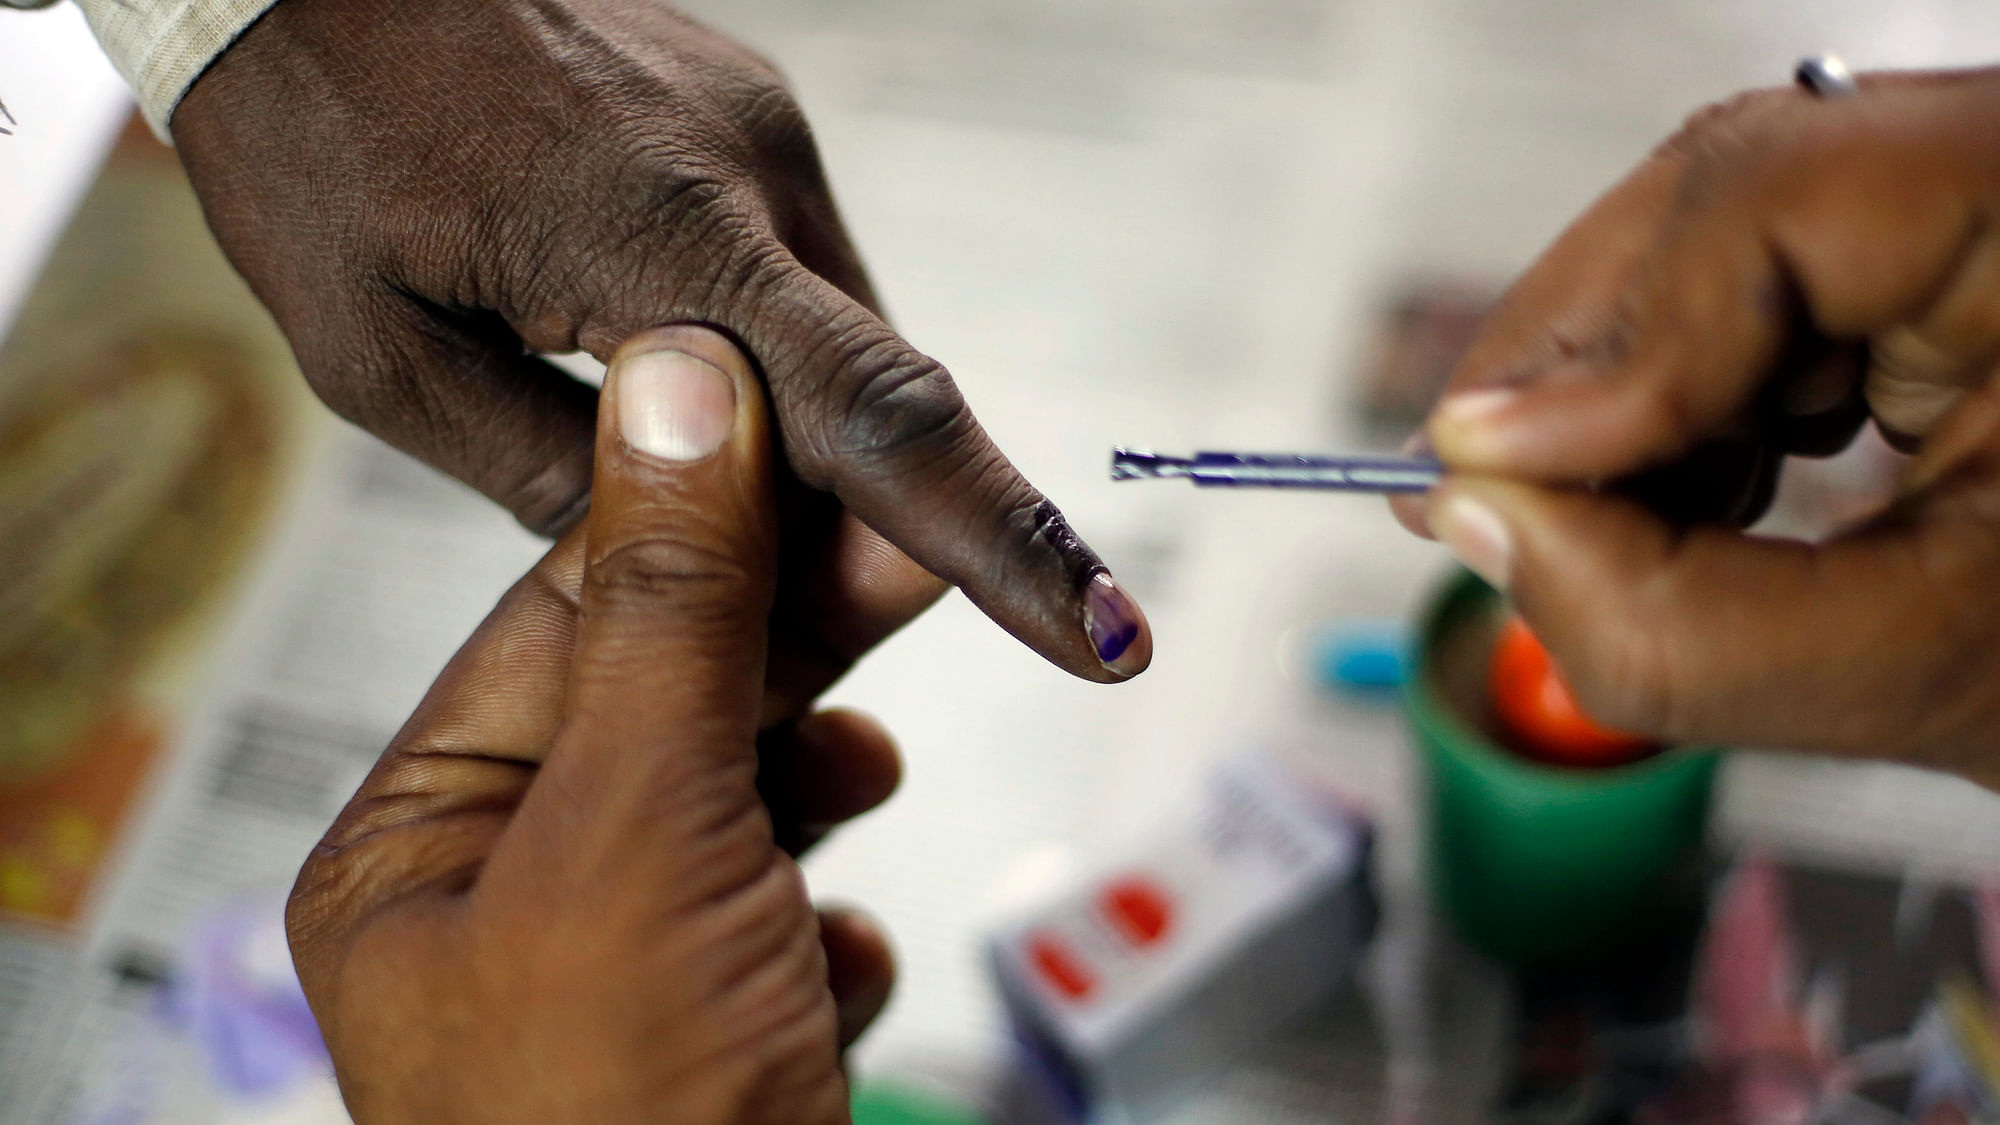 In Uttar Pradesh, nearly 7 lakh of the electorate decided not to vote for any political party or candidate. (Photo: Reuters)